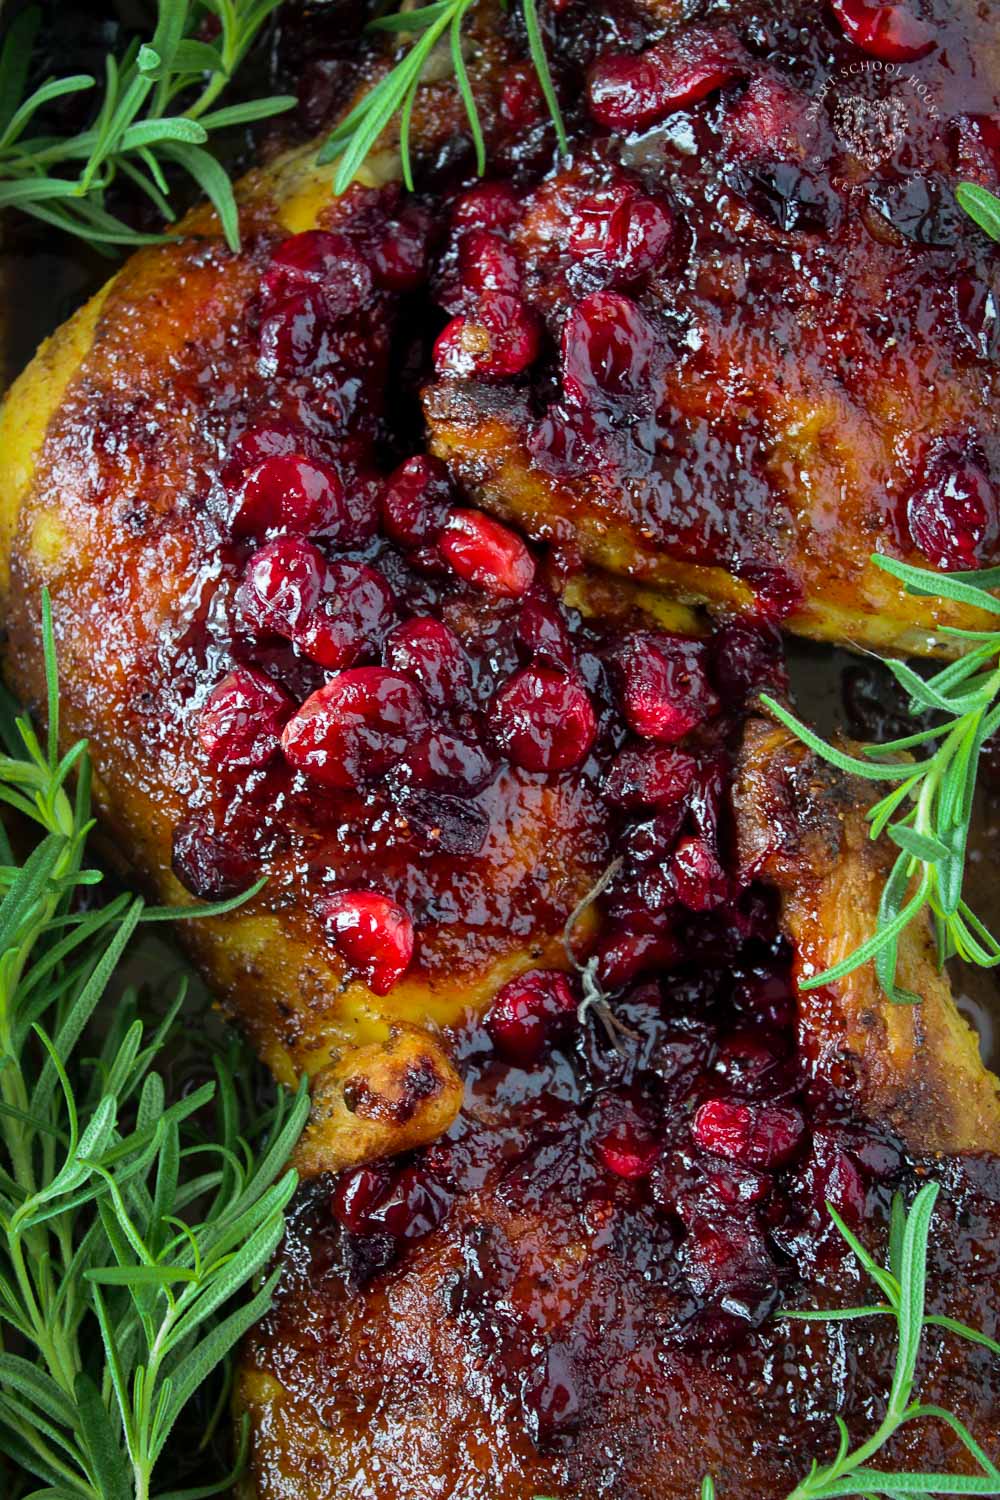 Beautifully baked chicken glazed with a delicious cranberry marinade. Cranberry Chicken is a gorgeous dinner for your Christmas table!